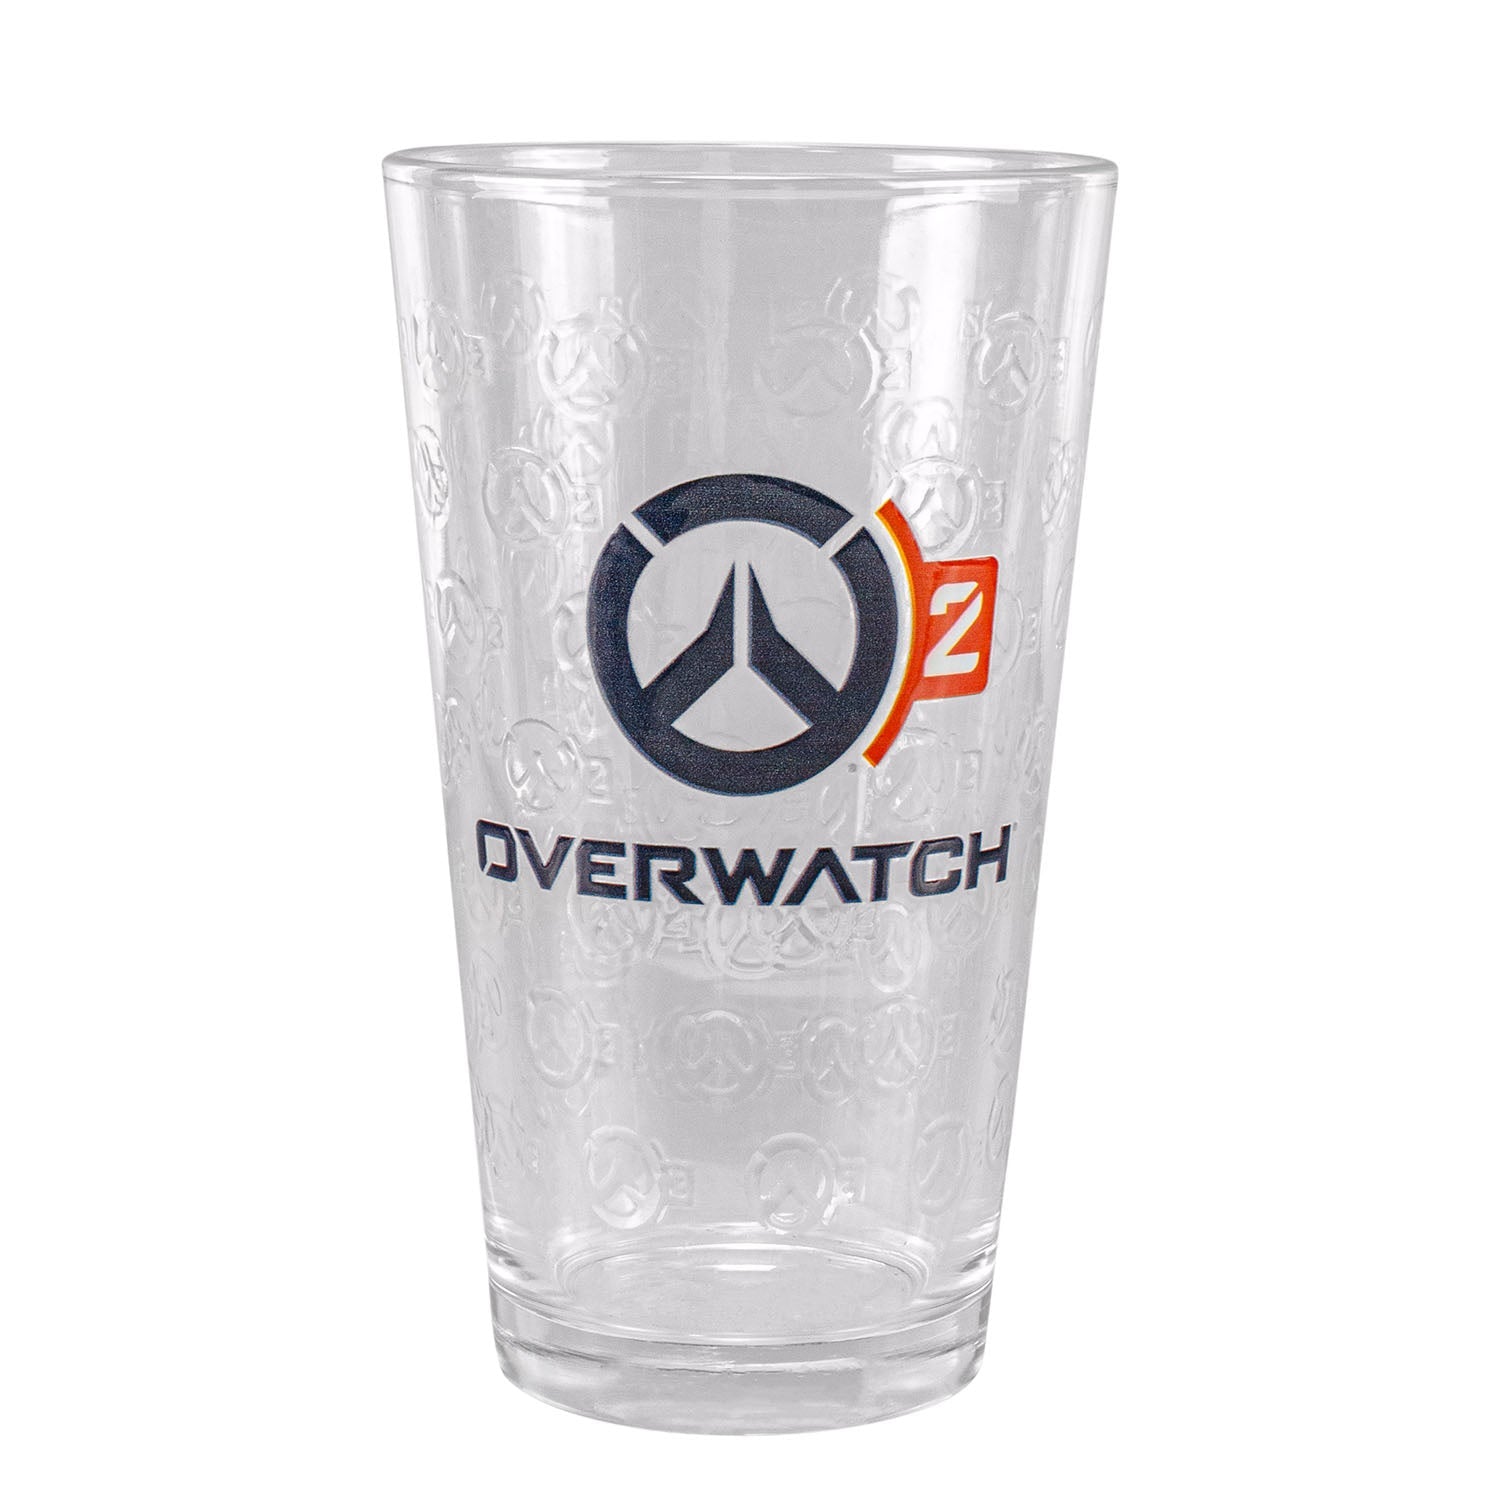 Overwatch 2 454ml Pint Glass in Blue - Front View